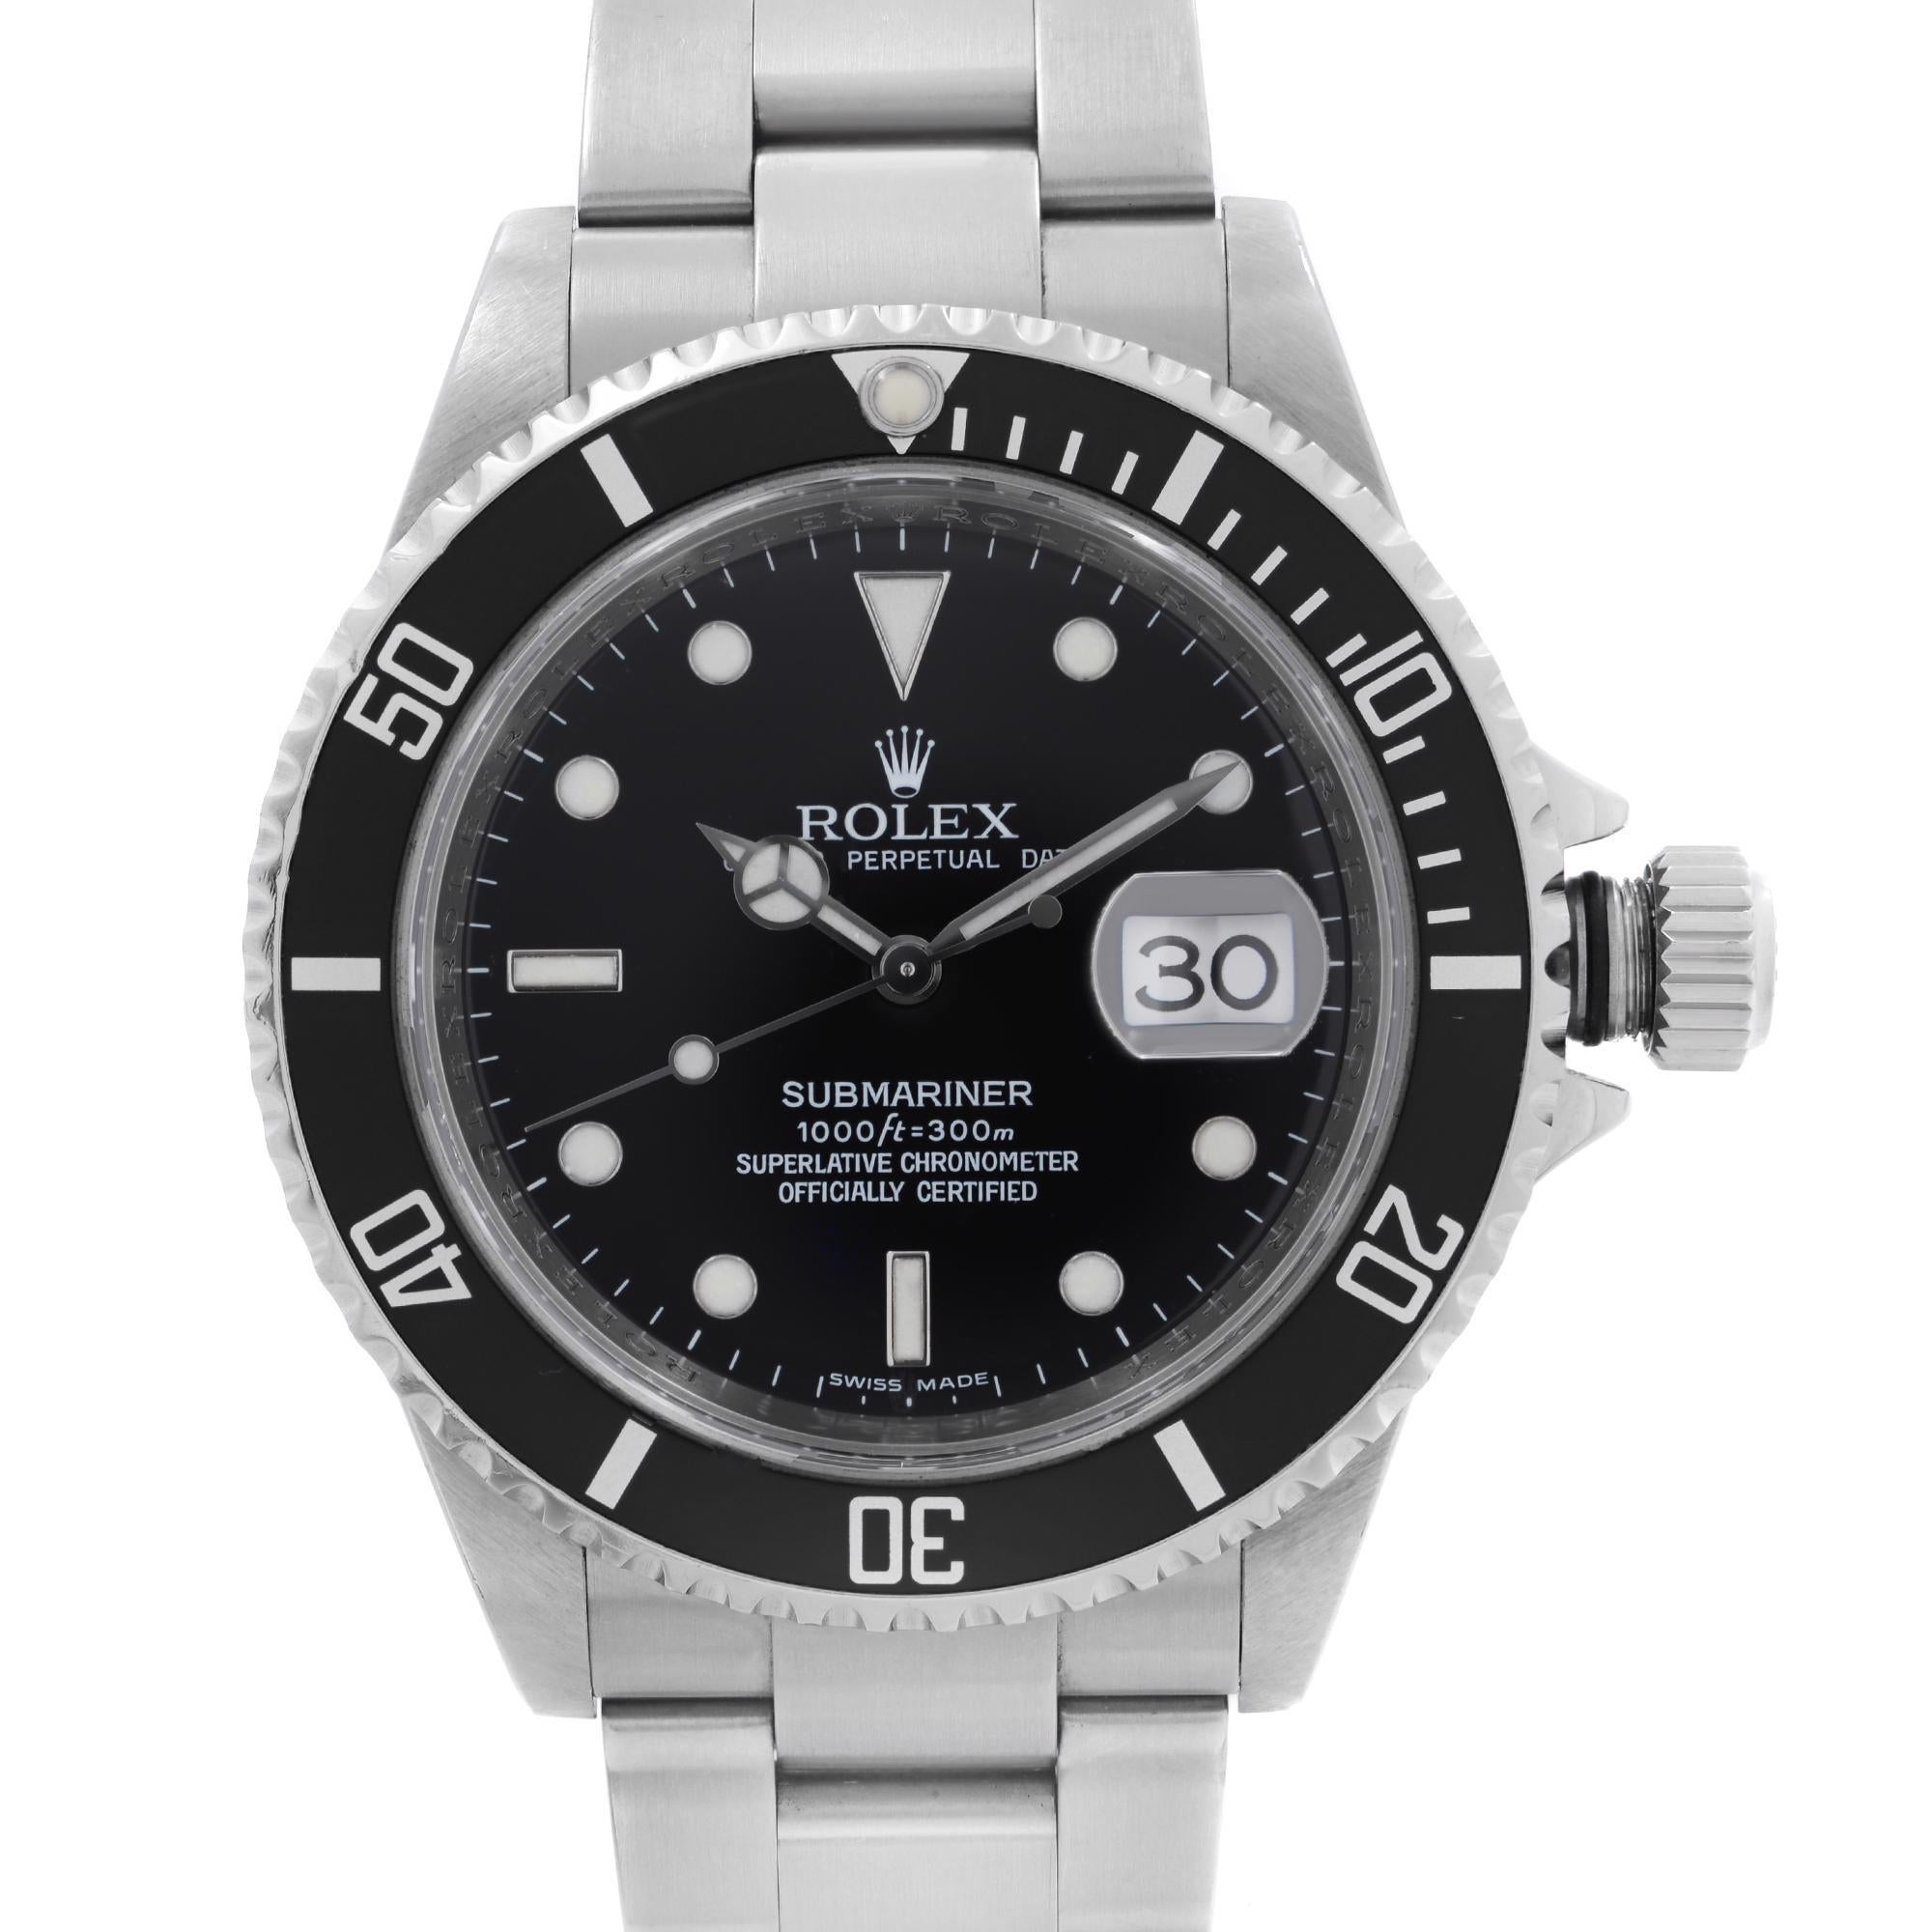 Pre-owned. Original Box and Papers are Included. Covered by a 2-year Chronostore Warranty.

Details:
Brand Rolex
Type Wristwatch
Department Men
Model Number 16610
Country/Region of Manufacture Switzerland
Style Diver, Luxury
Model Rolex Submariner